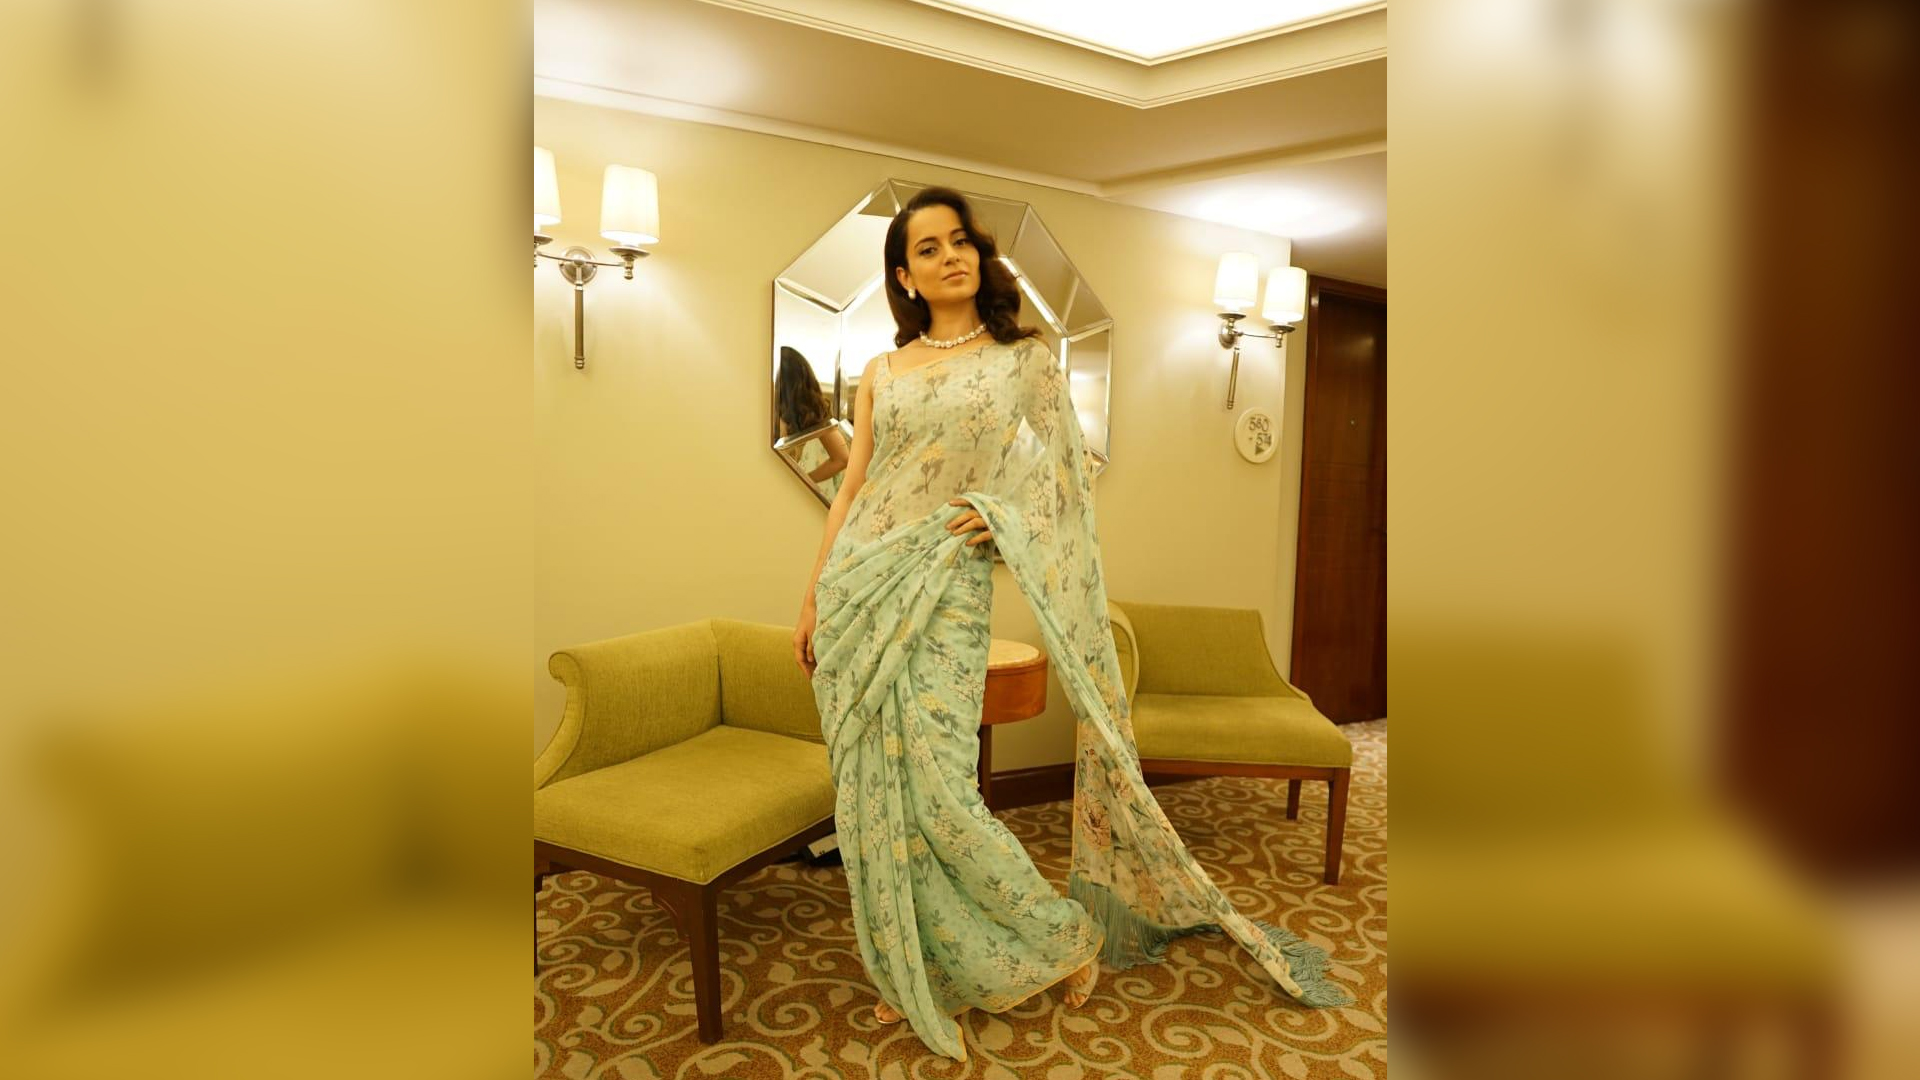 Nationalism is a strategy to direct nation’s passion : Kangana Ranaut